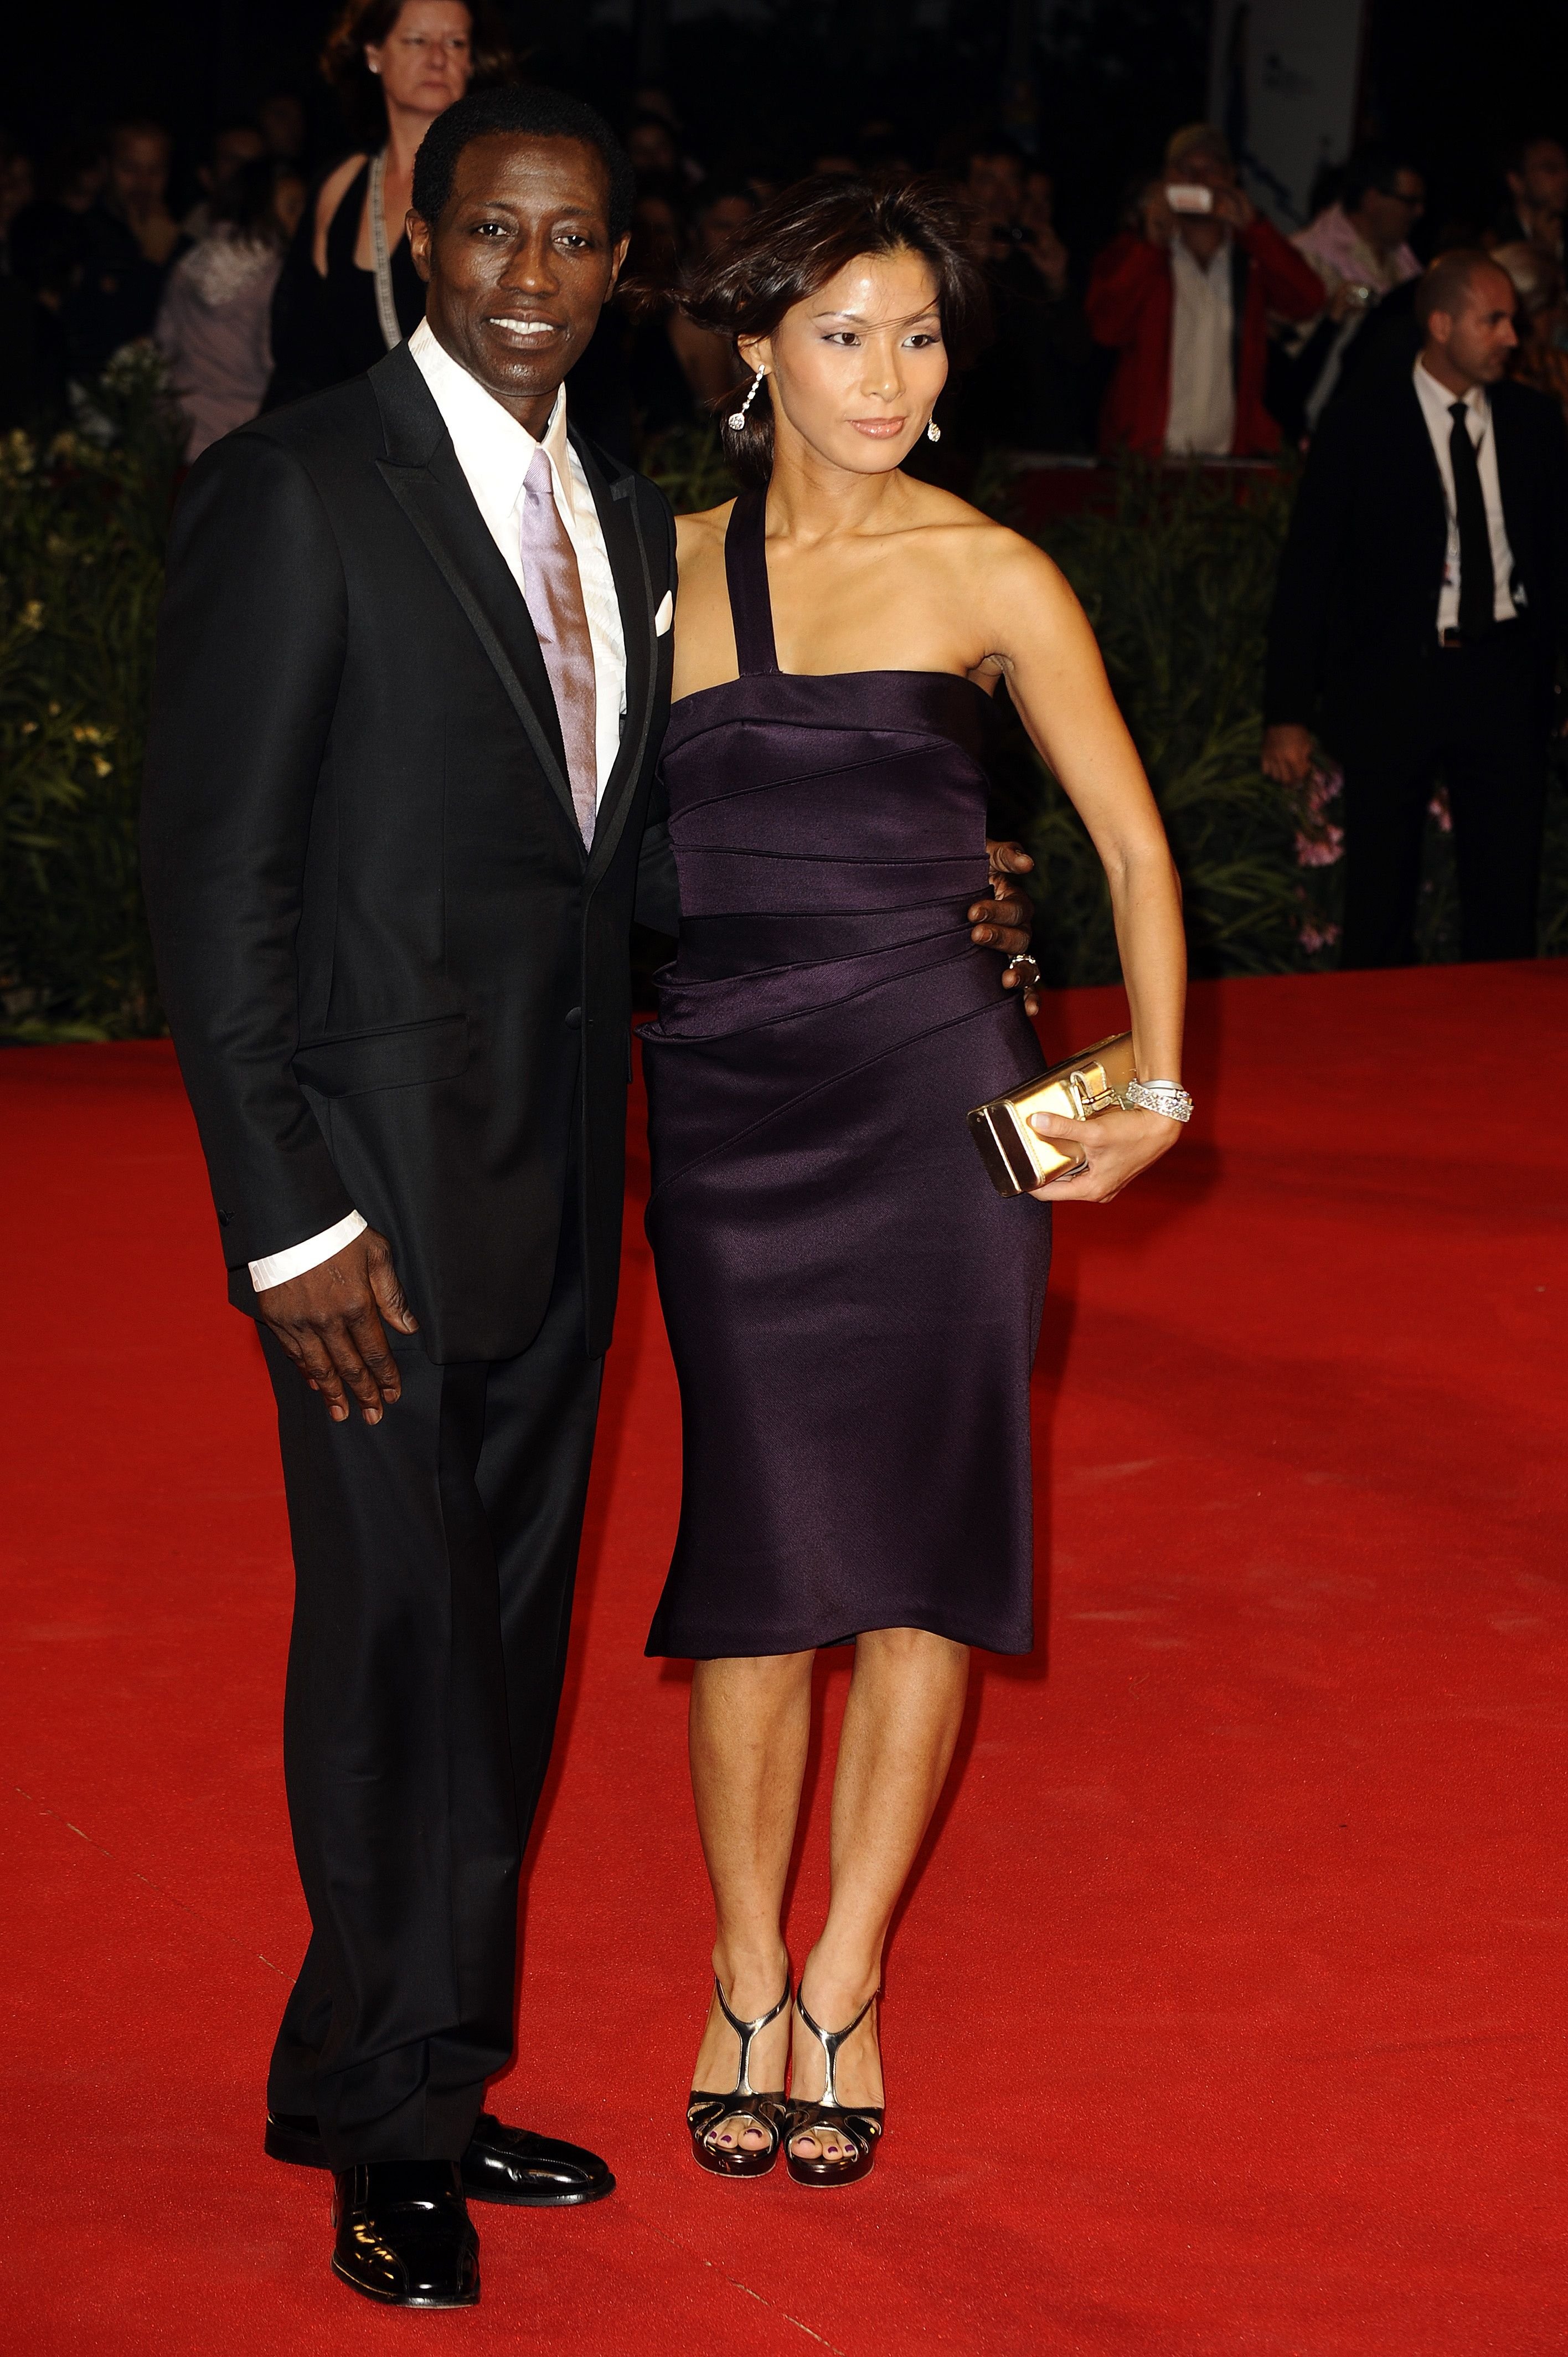 Wesley Snipes and Nikki Park during the "Brooklyn's Finest" premiere at the Sala Grande during the 66th Venice Film Festival on September 8, 2009 in Venice, Italy. | Source: Getty Images